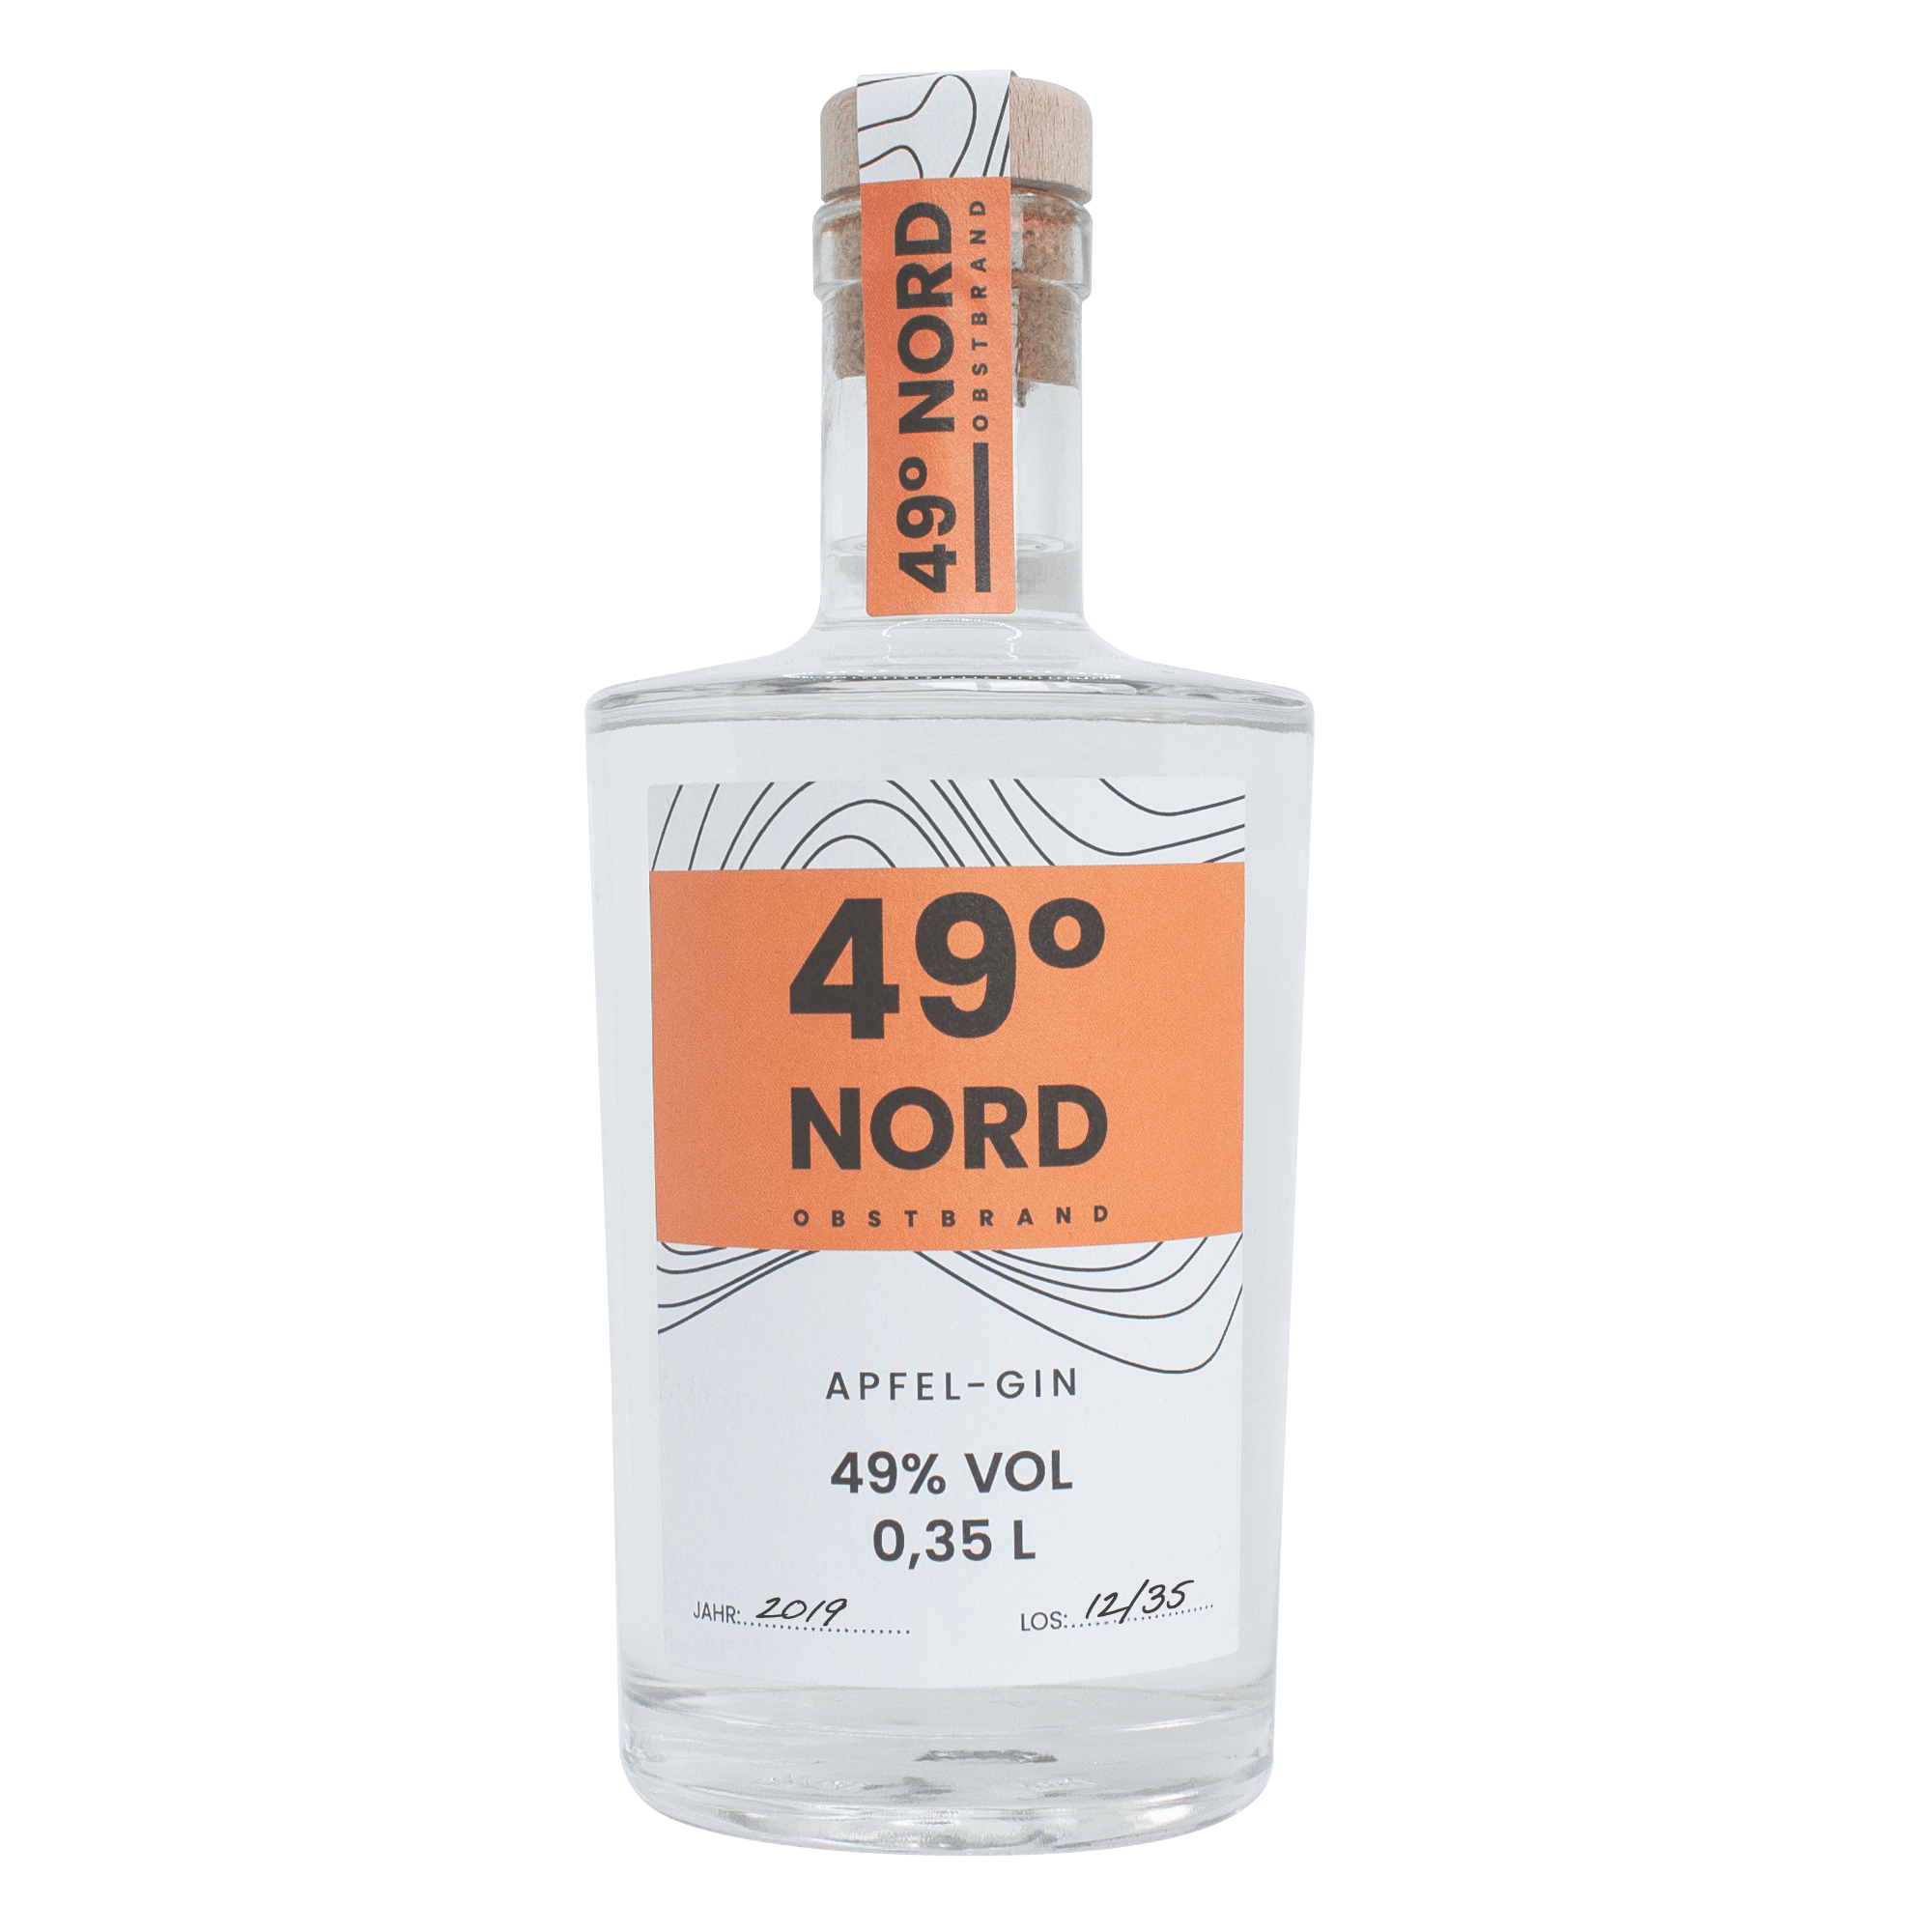 49° Nord Obstbrand Apfel-Gin – 49° Nord